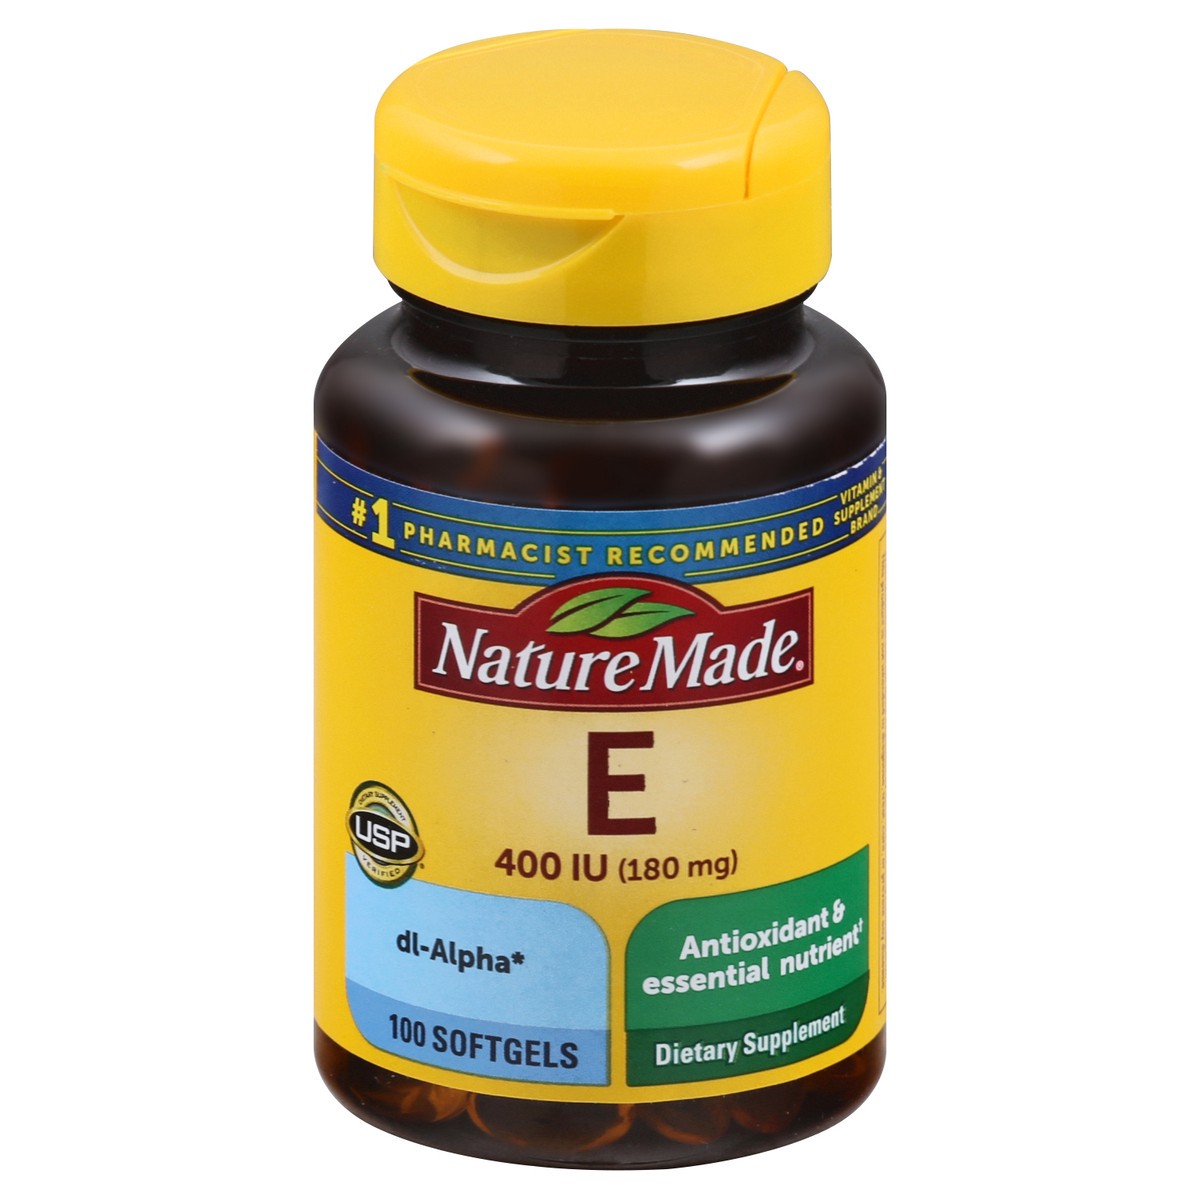 slide 1 of 74, Nature Made Vitamin E 180 mg (400 IU) dl-Alpha, Dietary Supplement for Antioxidant Support, 100 Softgels, 100 Day Supply, 100 ct